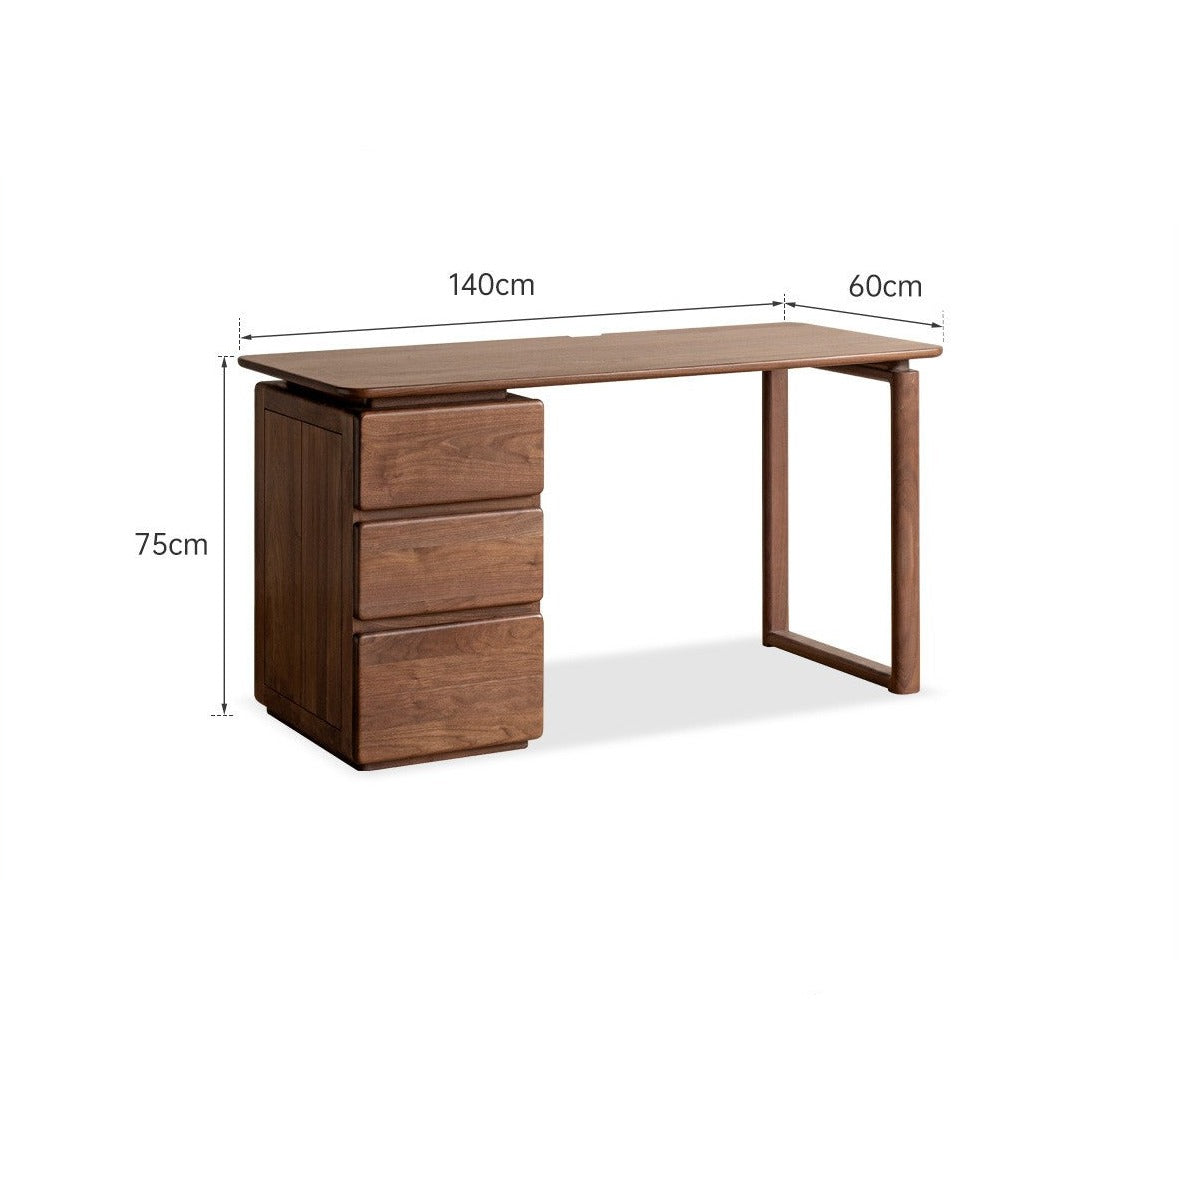 Black Walnut Solid Wood Desk with Drawers